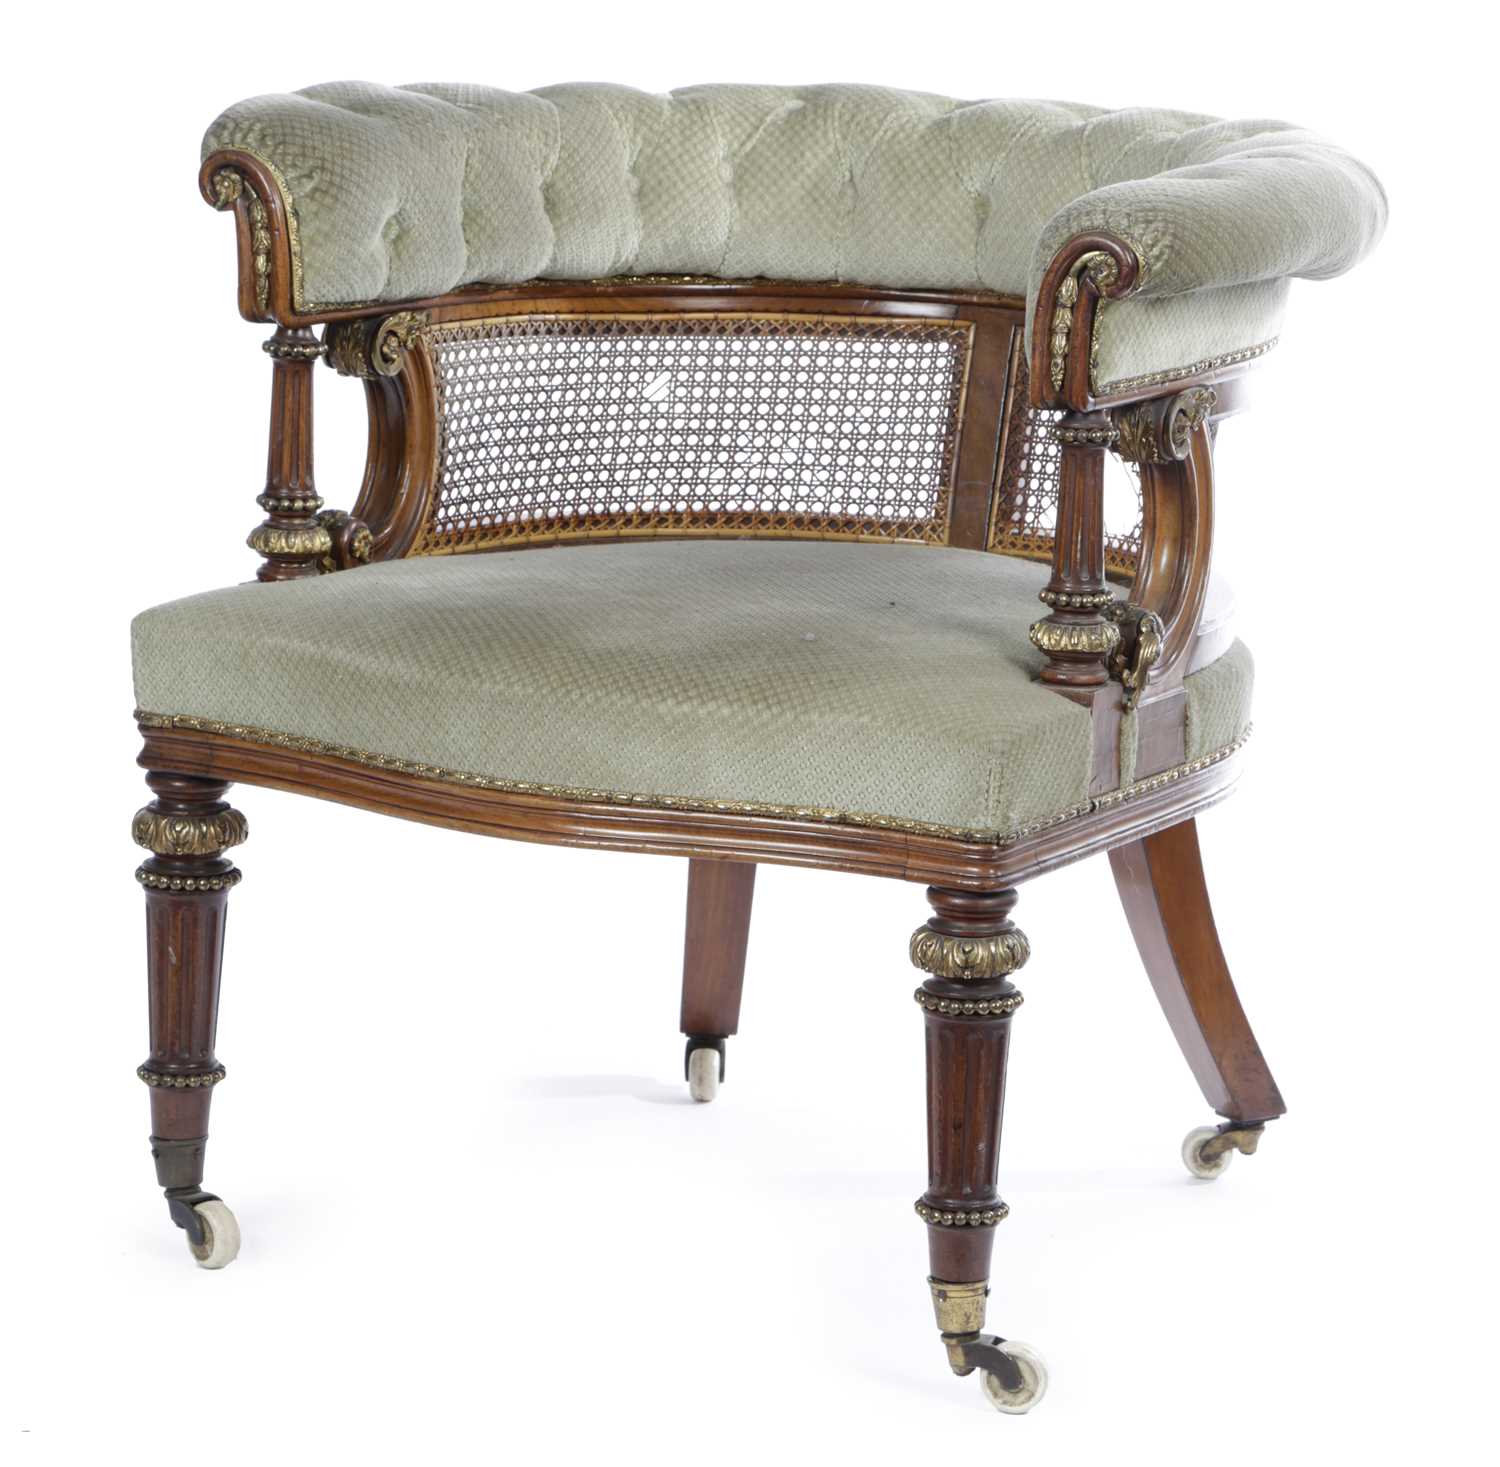 A VICTORIAN WALNUT AND ORMOLU MOUNTED DESK CHAIR IN THE MANNER OF HOLLAND & SONS, C.1860 with a